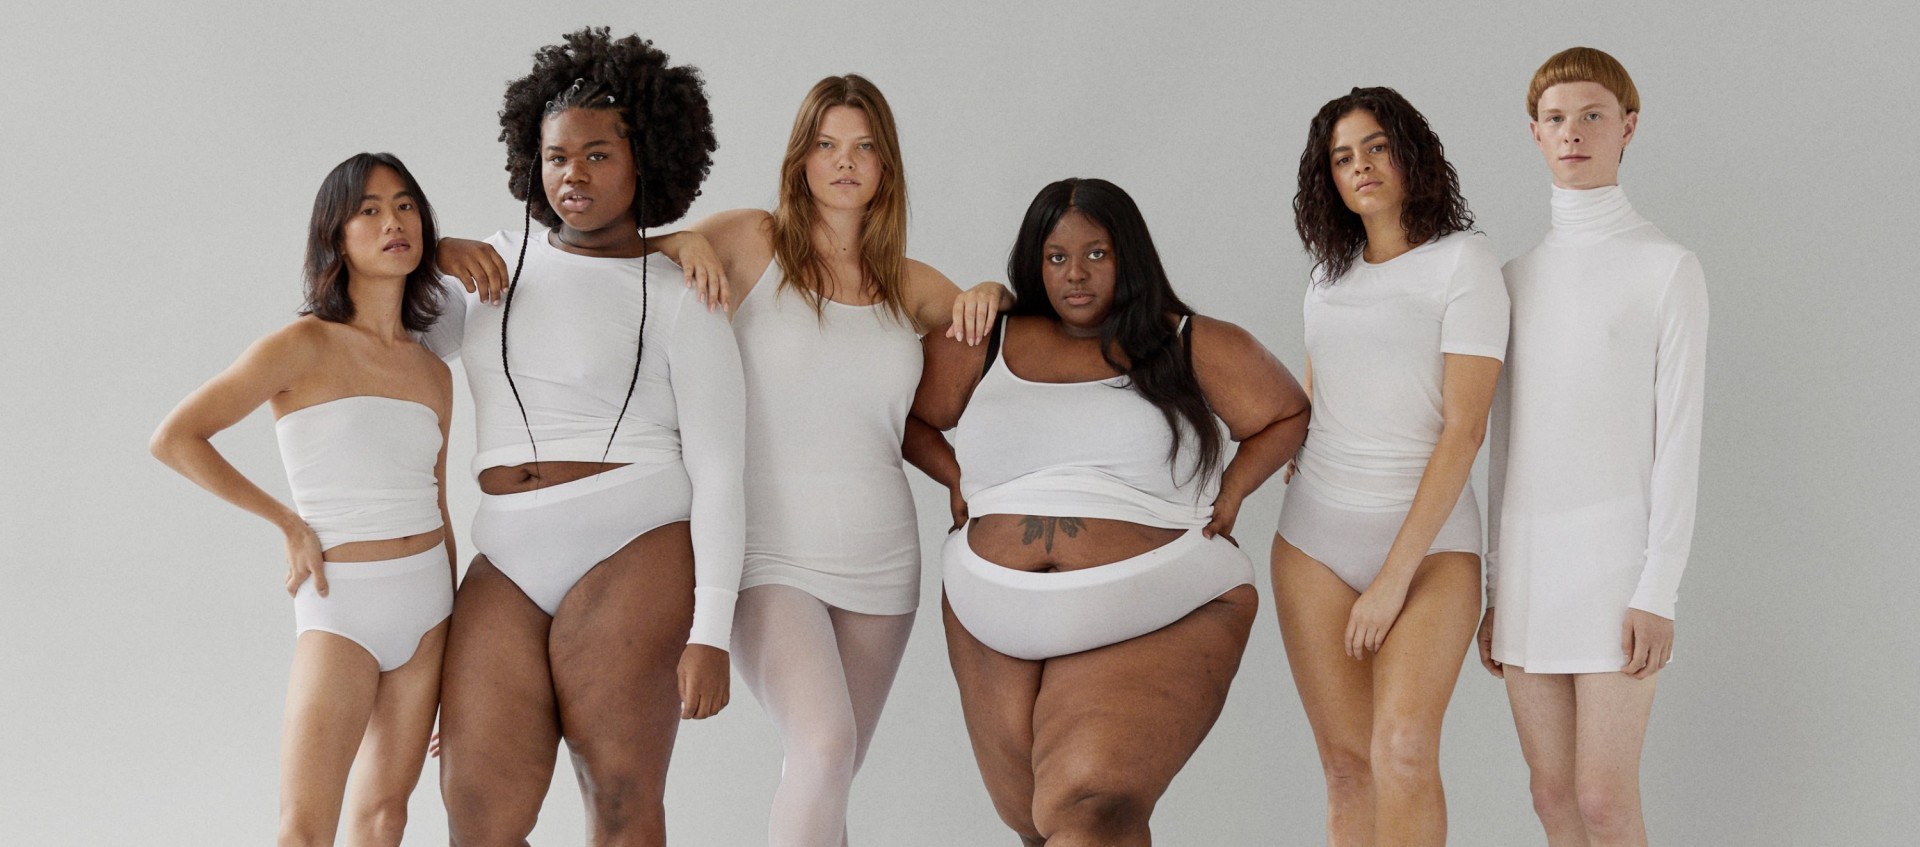 New study on women's underwear choices has empowering finding - When Women  Inspire